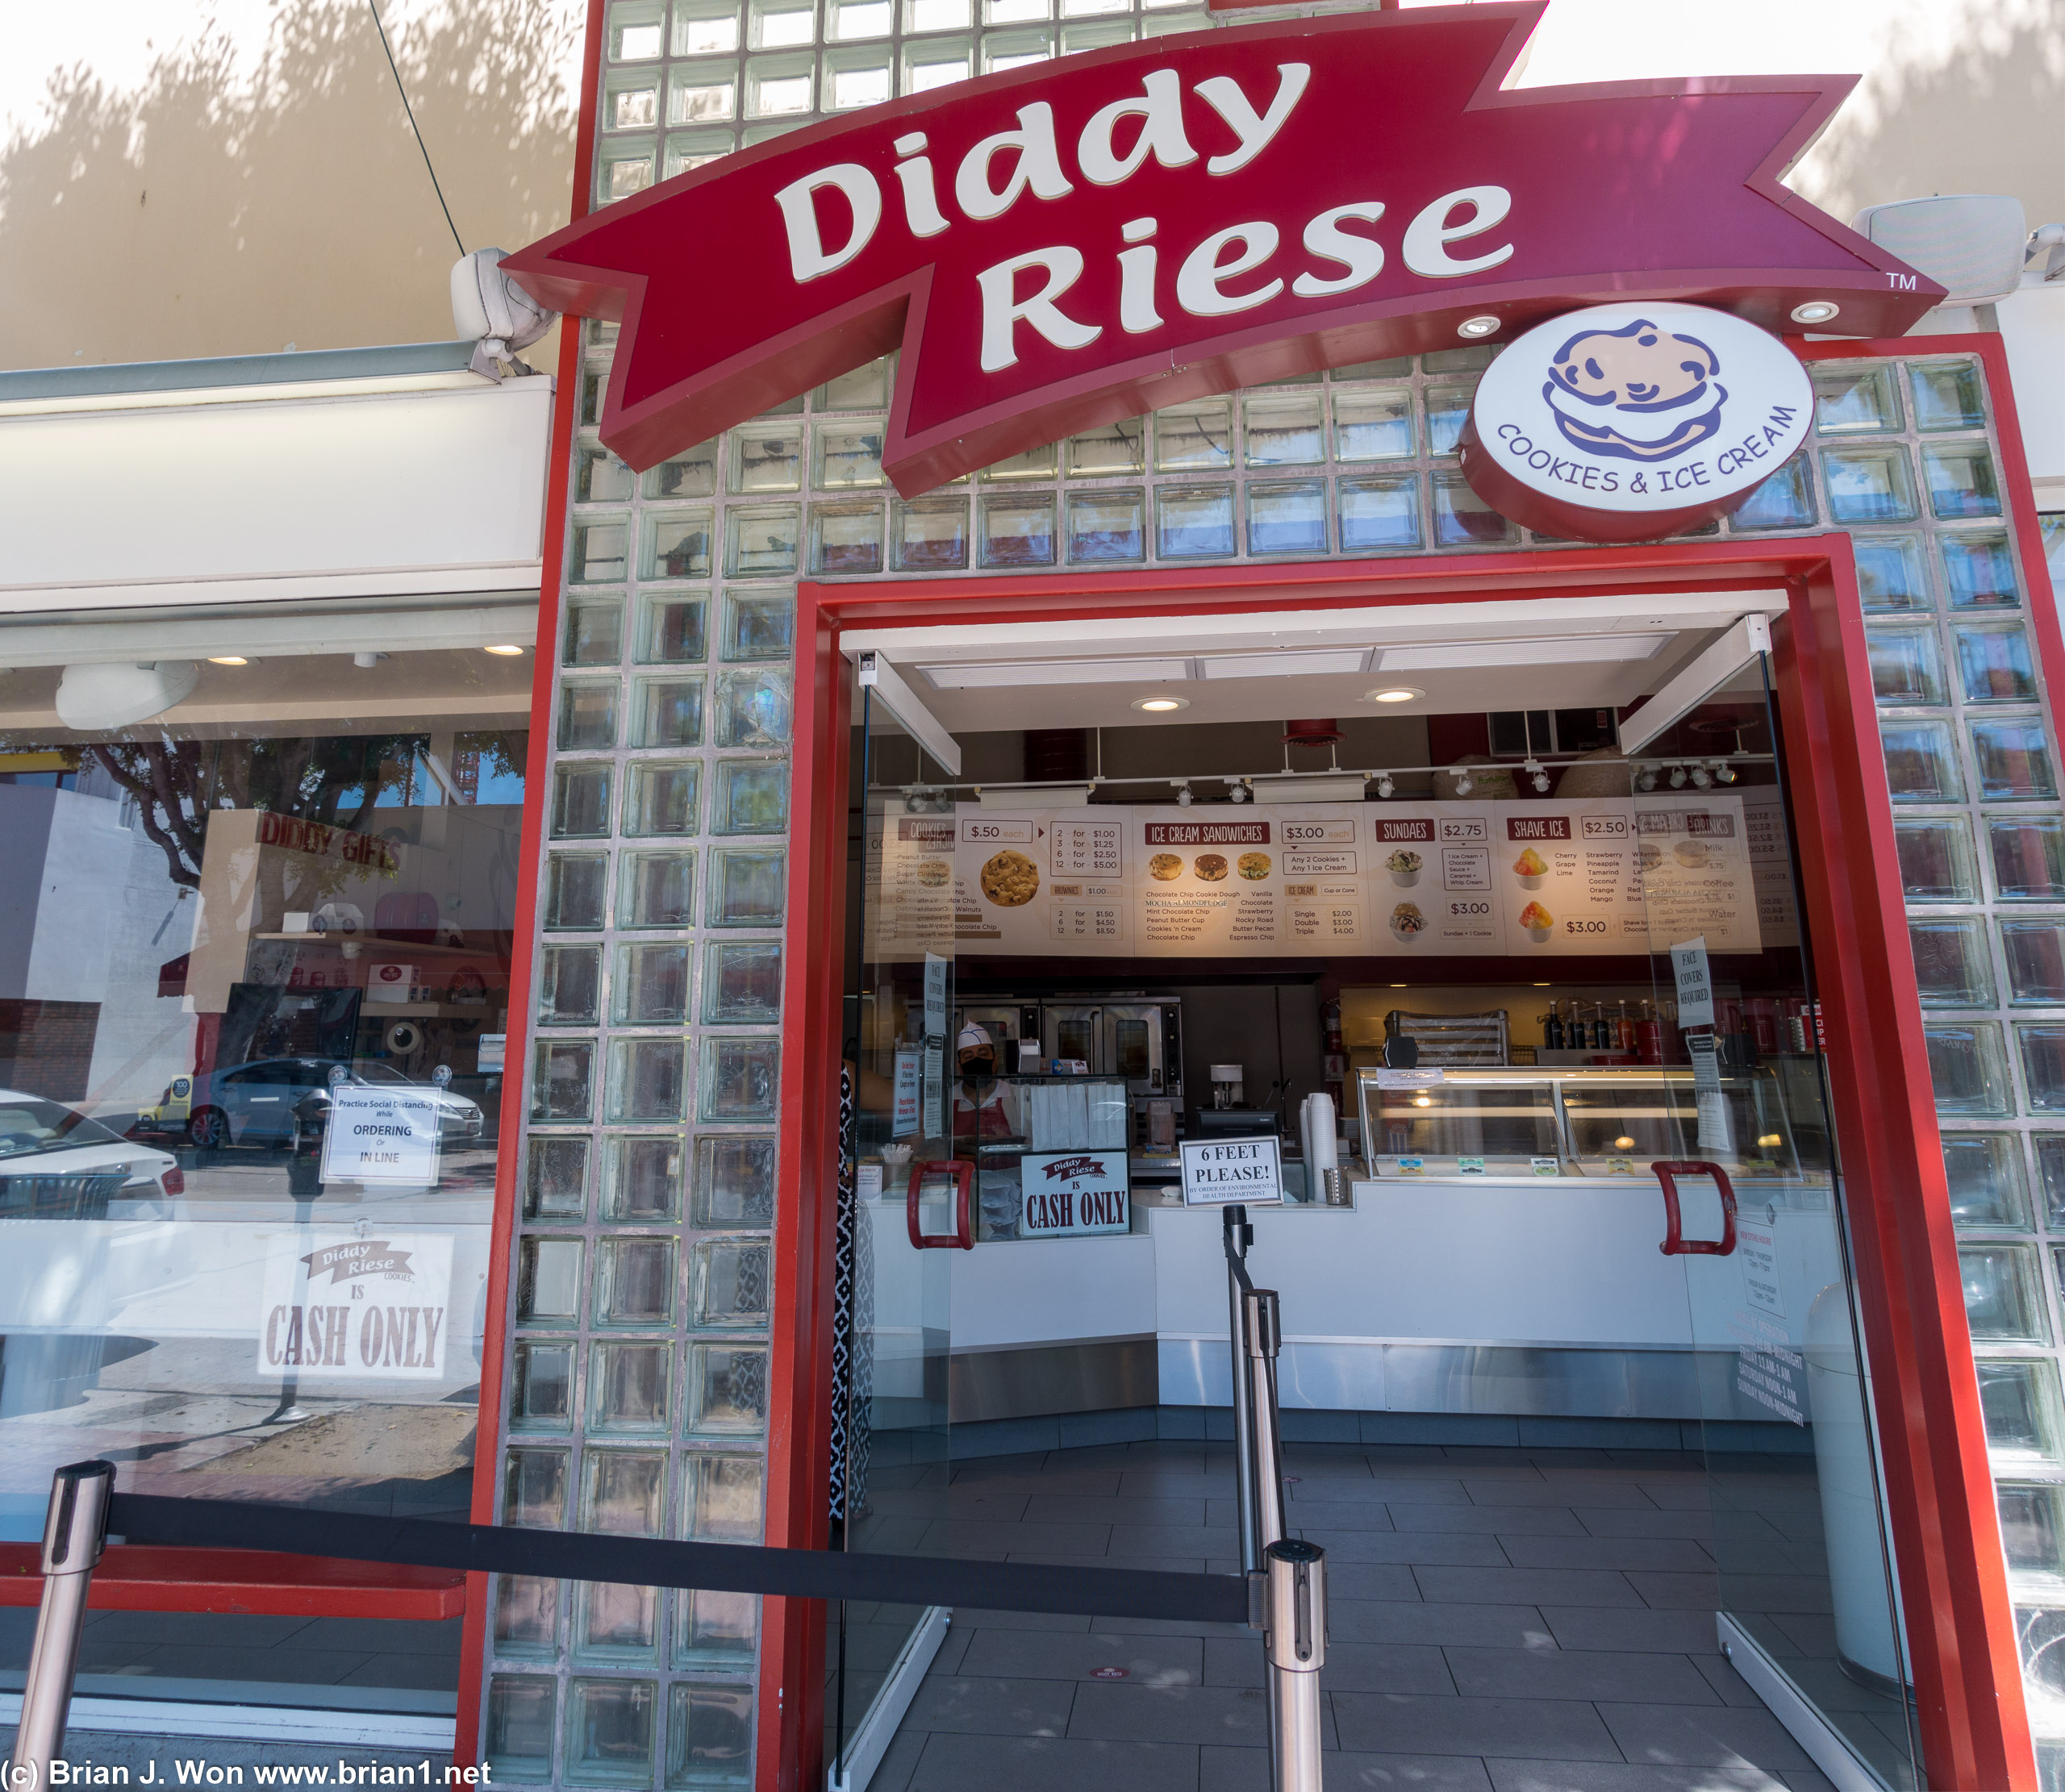 Diddy Riese has reopened!